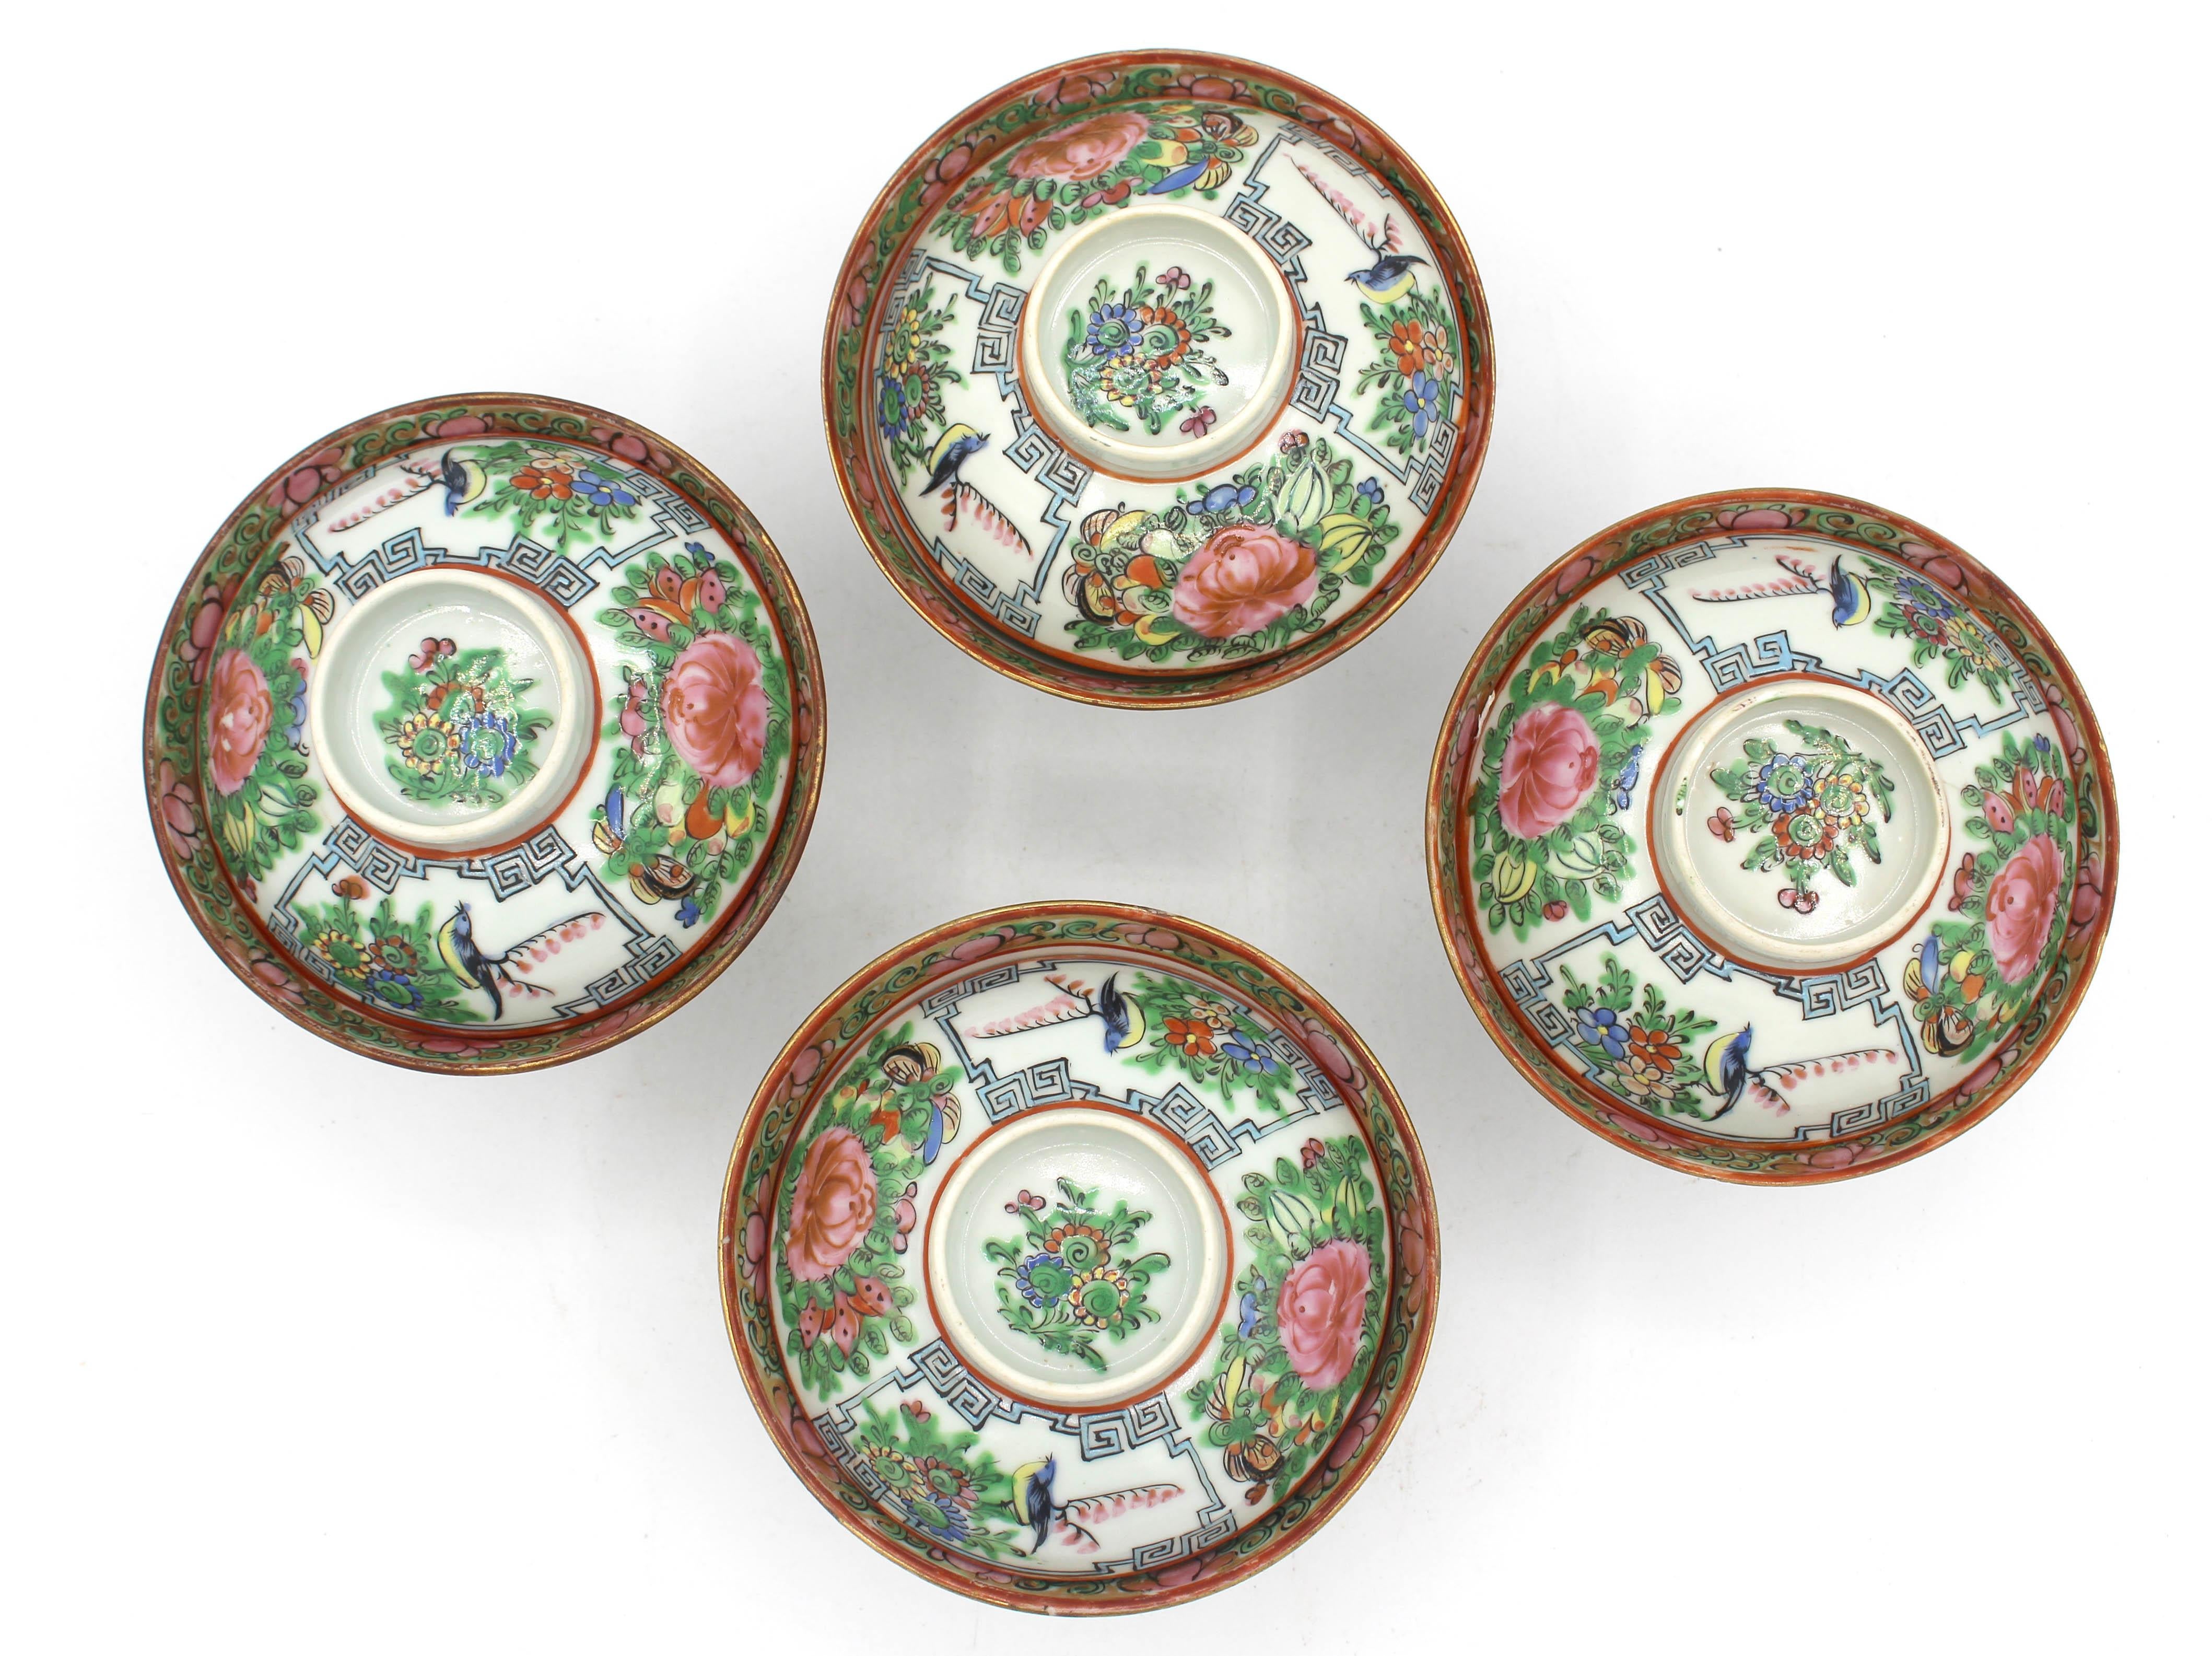 Post-1911 marks set of 4 Rose Canton covered rice bowls, Chinese export. Traditional form. Double happiness symbols. Good condition with minor signs of use.
4.25